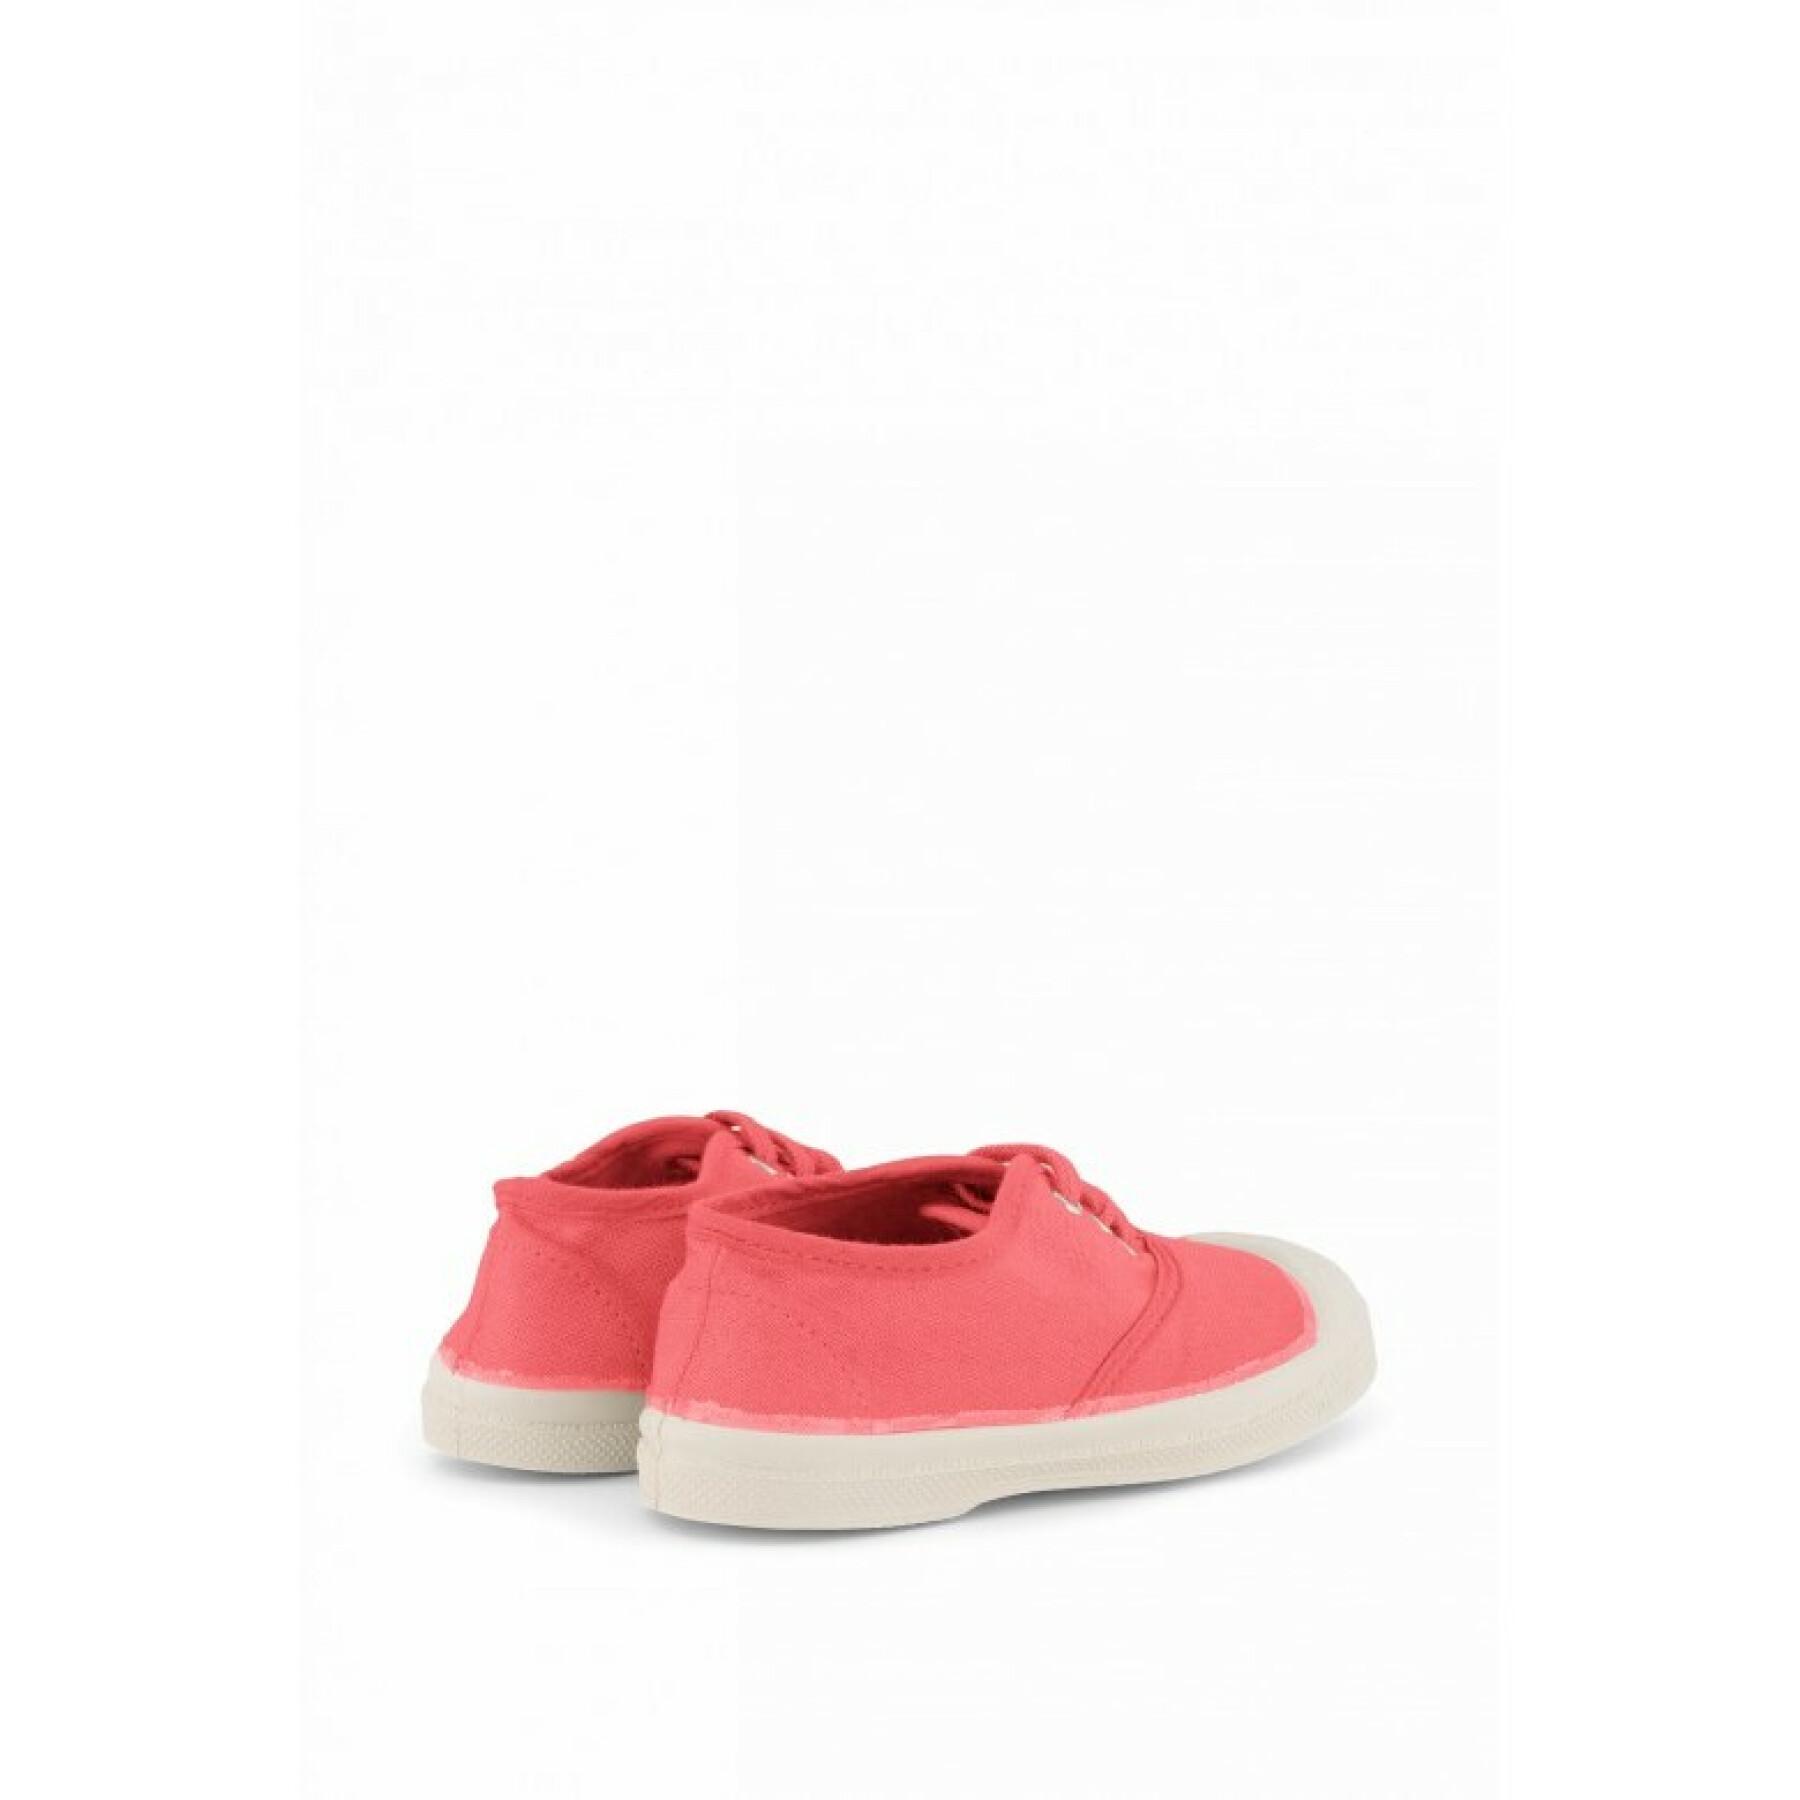 Girl's lace-up sneakers Bensimon tennis